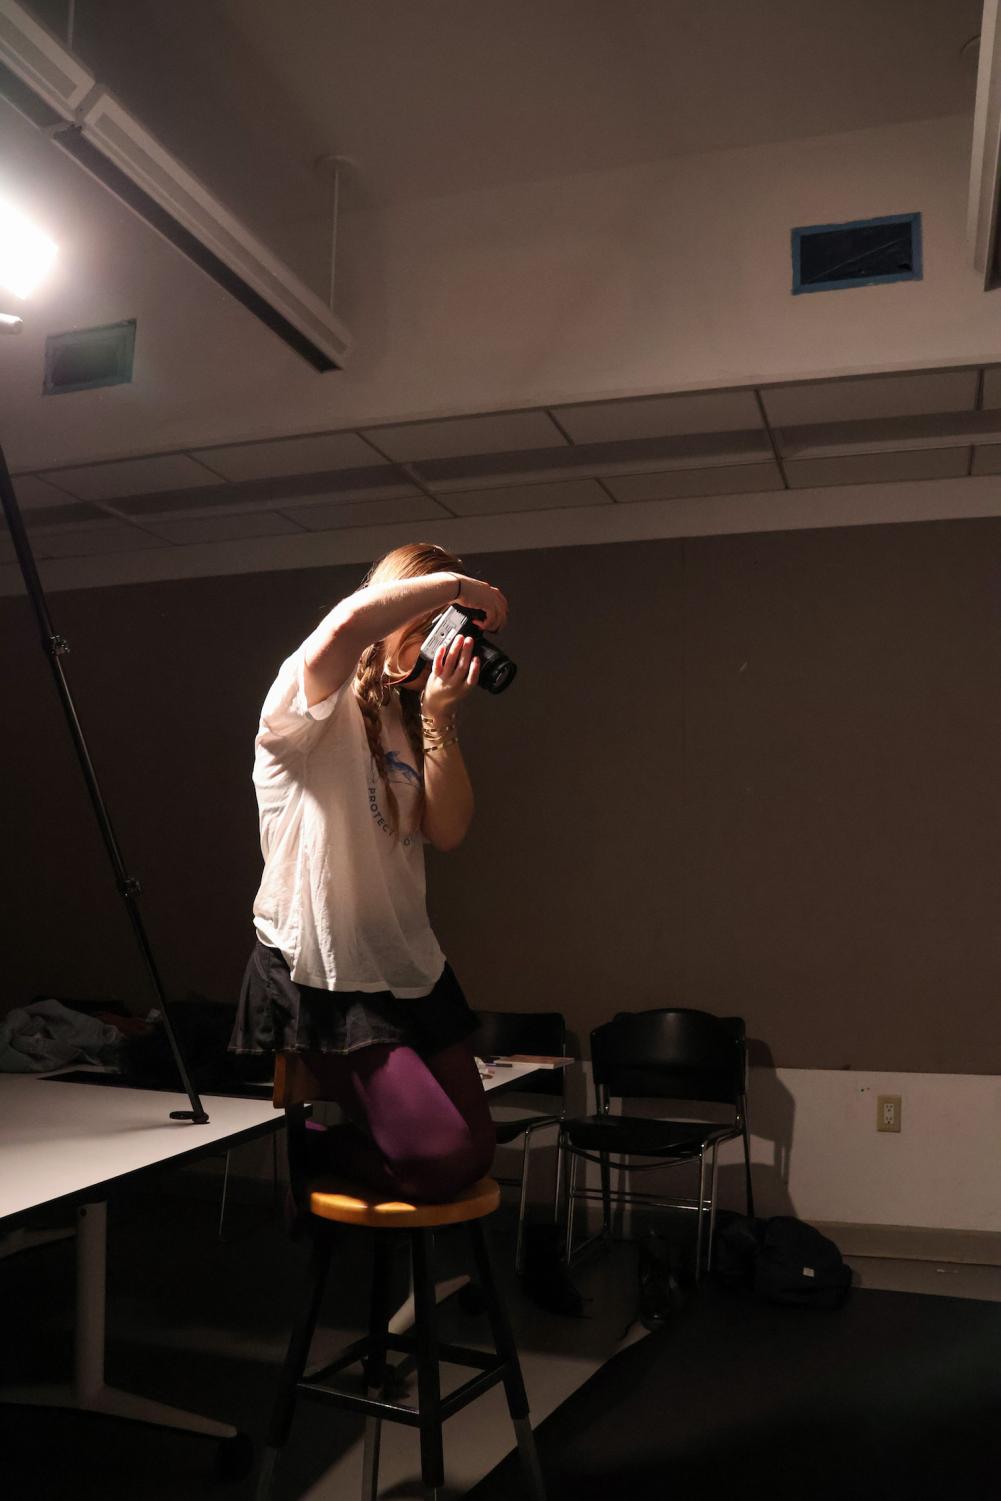 Photograph of a female college student with braided blond hair wearing a white t-shirt, a black skirt, maroon leggings, and gold bracelets. She kneels on a stool holding a DSLR camera up to her face pointing it.